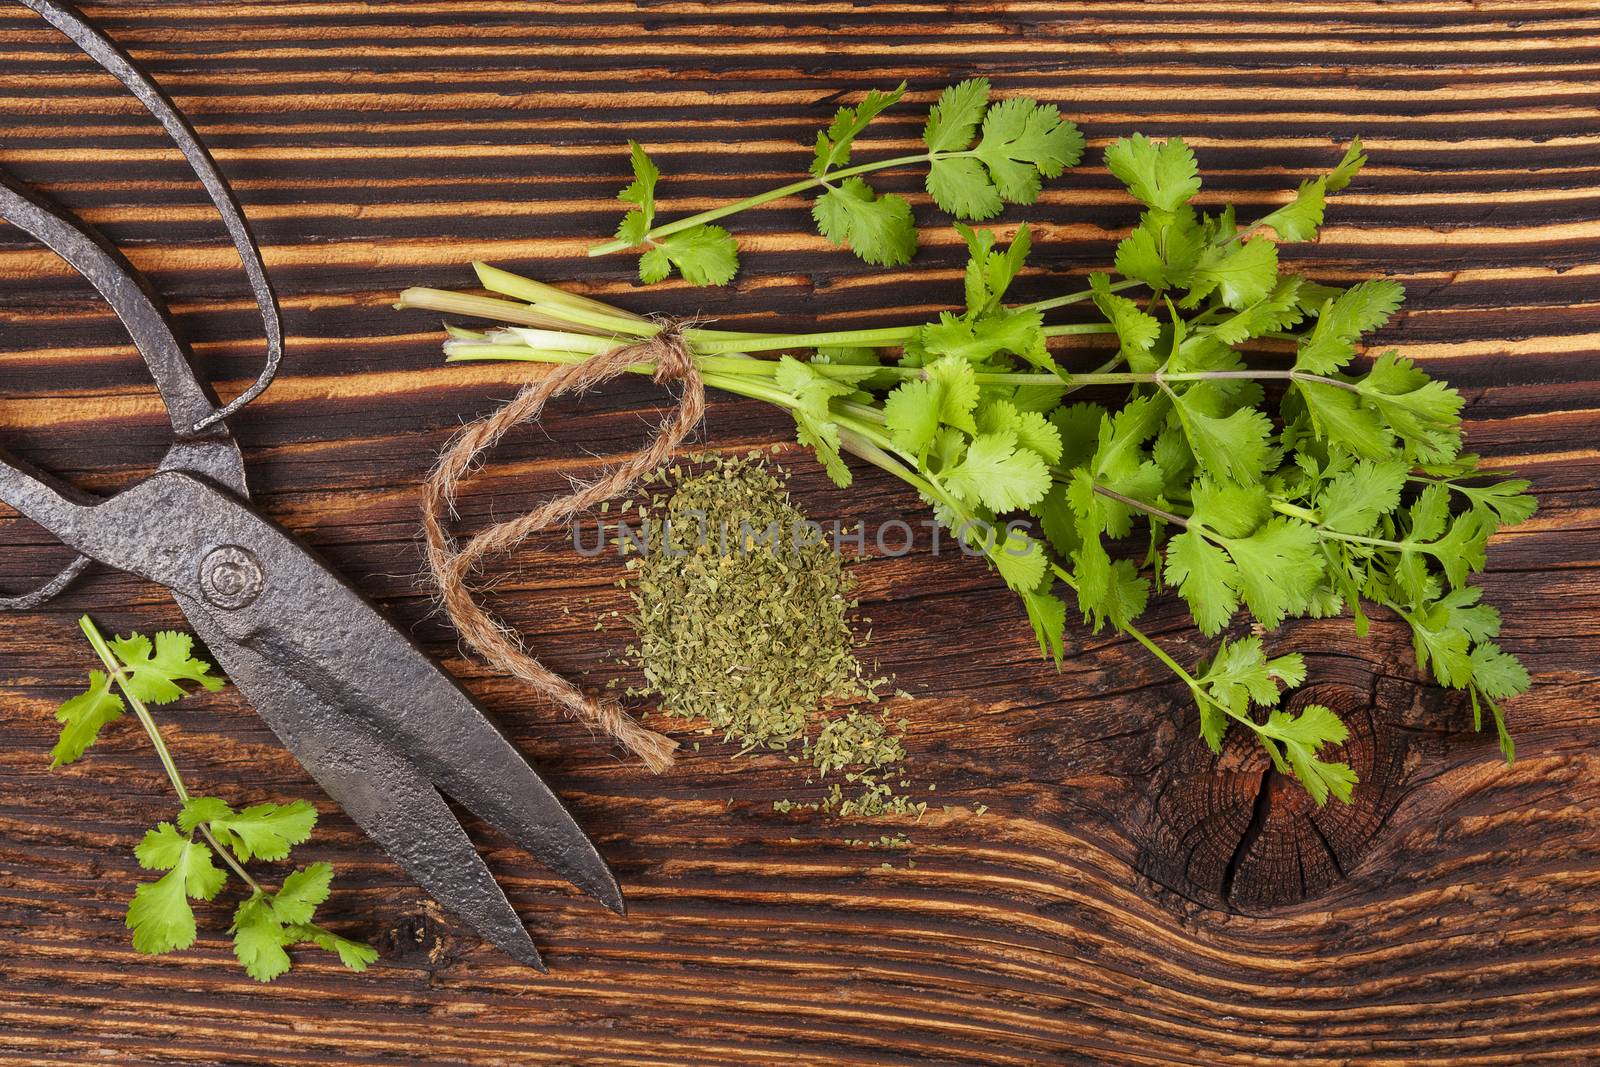 Fresh and dry coriander herb with vintage scissors on rustic wooden background. Culinary aromatic herbs.